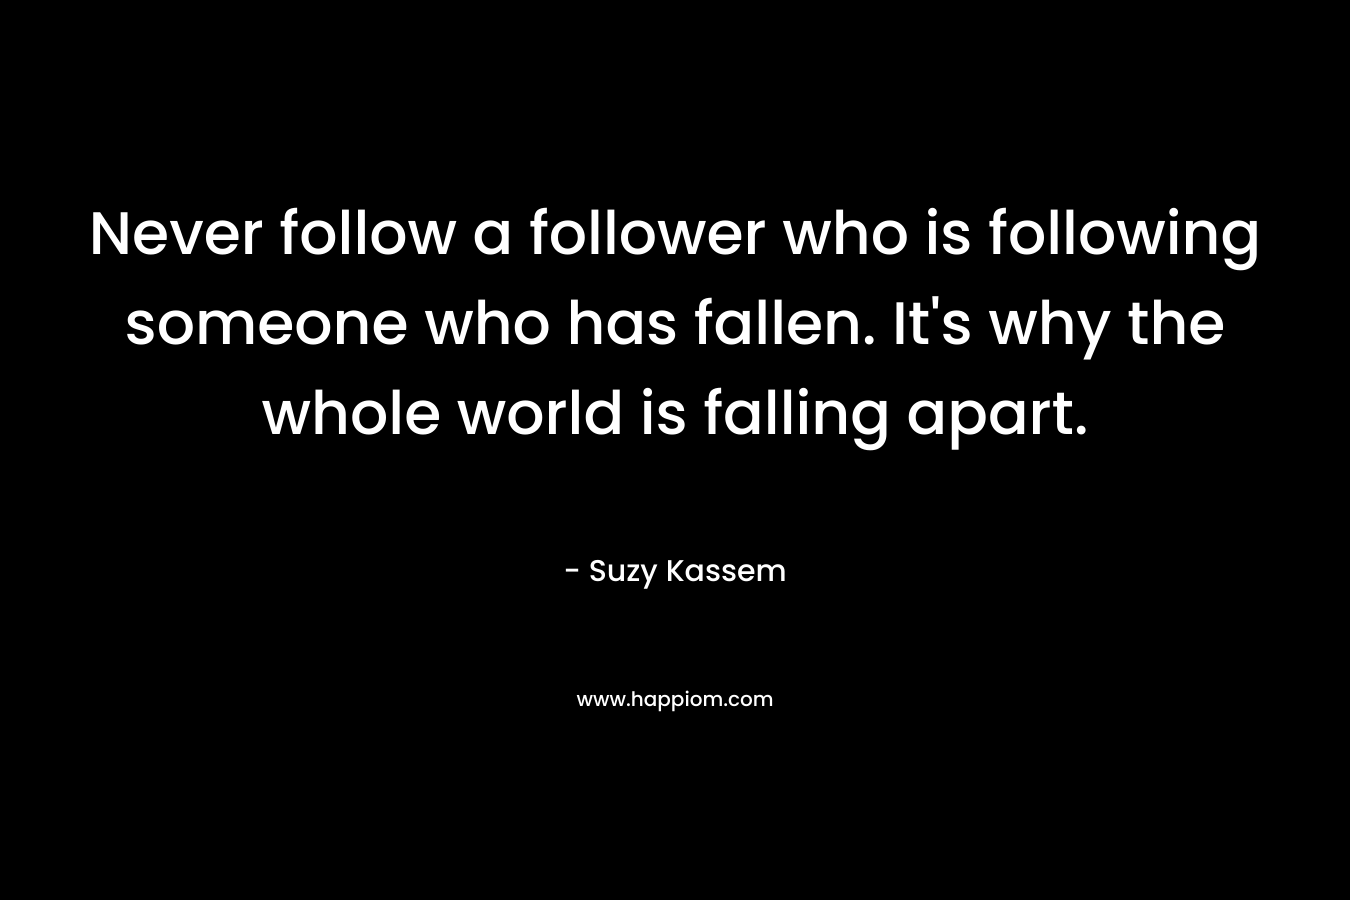 Never follow a follower who is following someone who has fallen. It's why the whole world is falling apart.